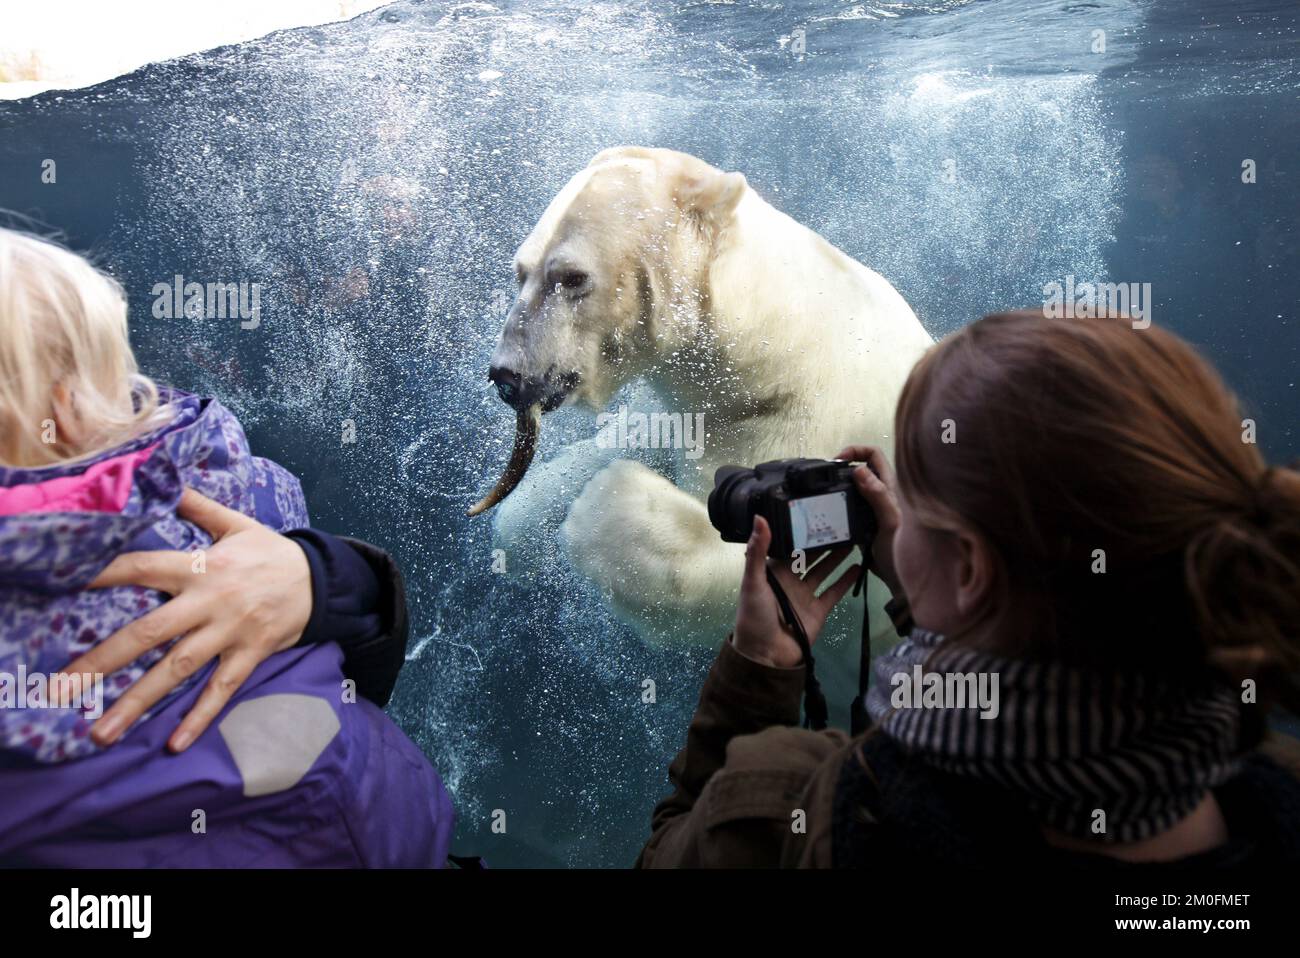 The official opening of the Arctic Ring of Copenhagen Zoo. The facility is a gift from the AP MÃ¸ller and Chastine Mc-Kinney MÃ¸ller Foundation for General Purposes. (Jens Dresling / POLFOTO) Stock Photo